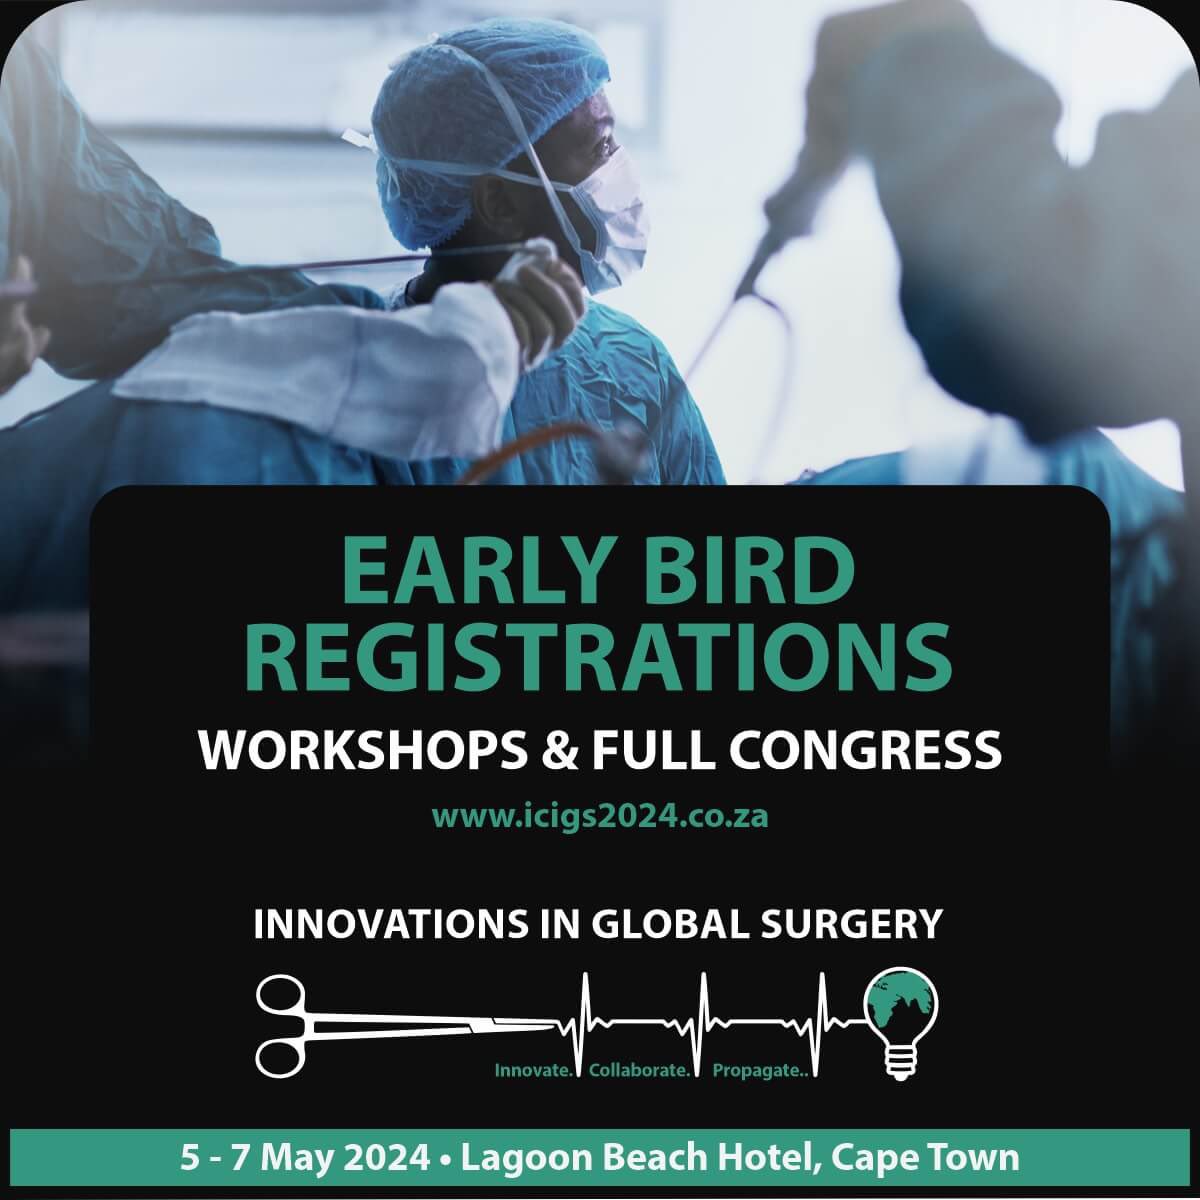 We will be hosting the 3rd International Congress in Innovations for Global Surgery at UCT icigs2024.co.za